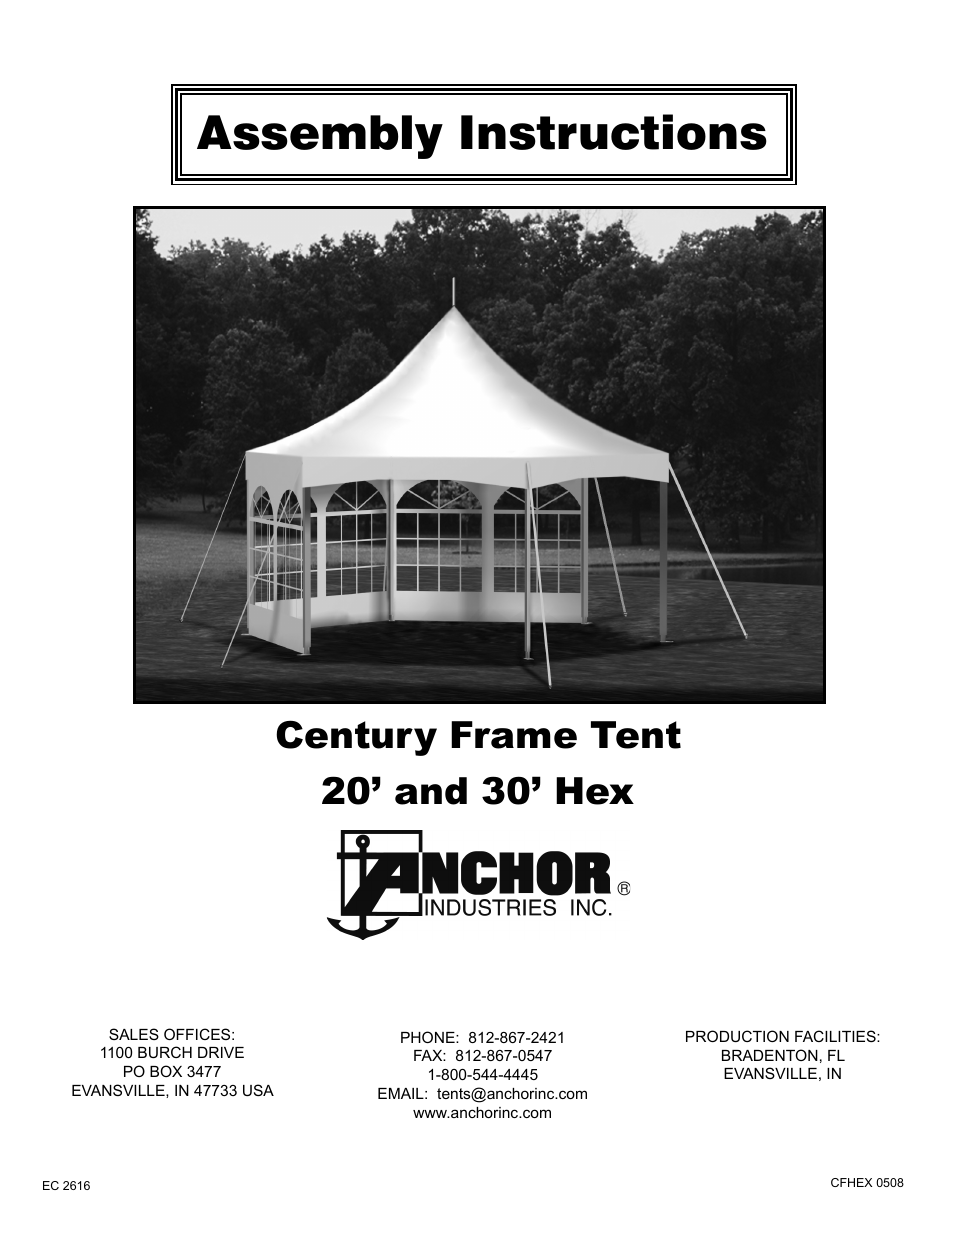 CENTURY FRAME TENTS 20 AND 30 HEX